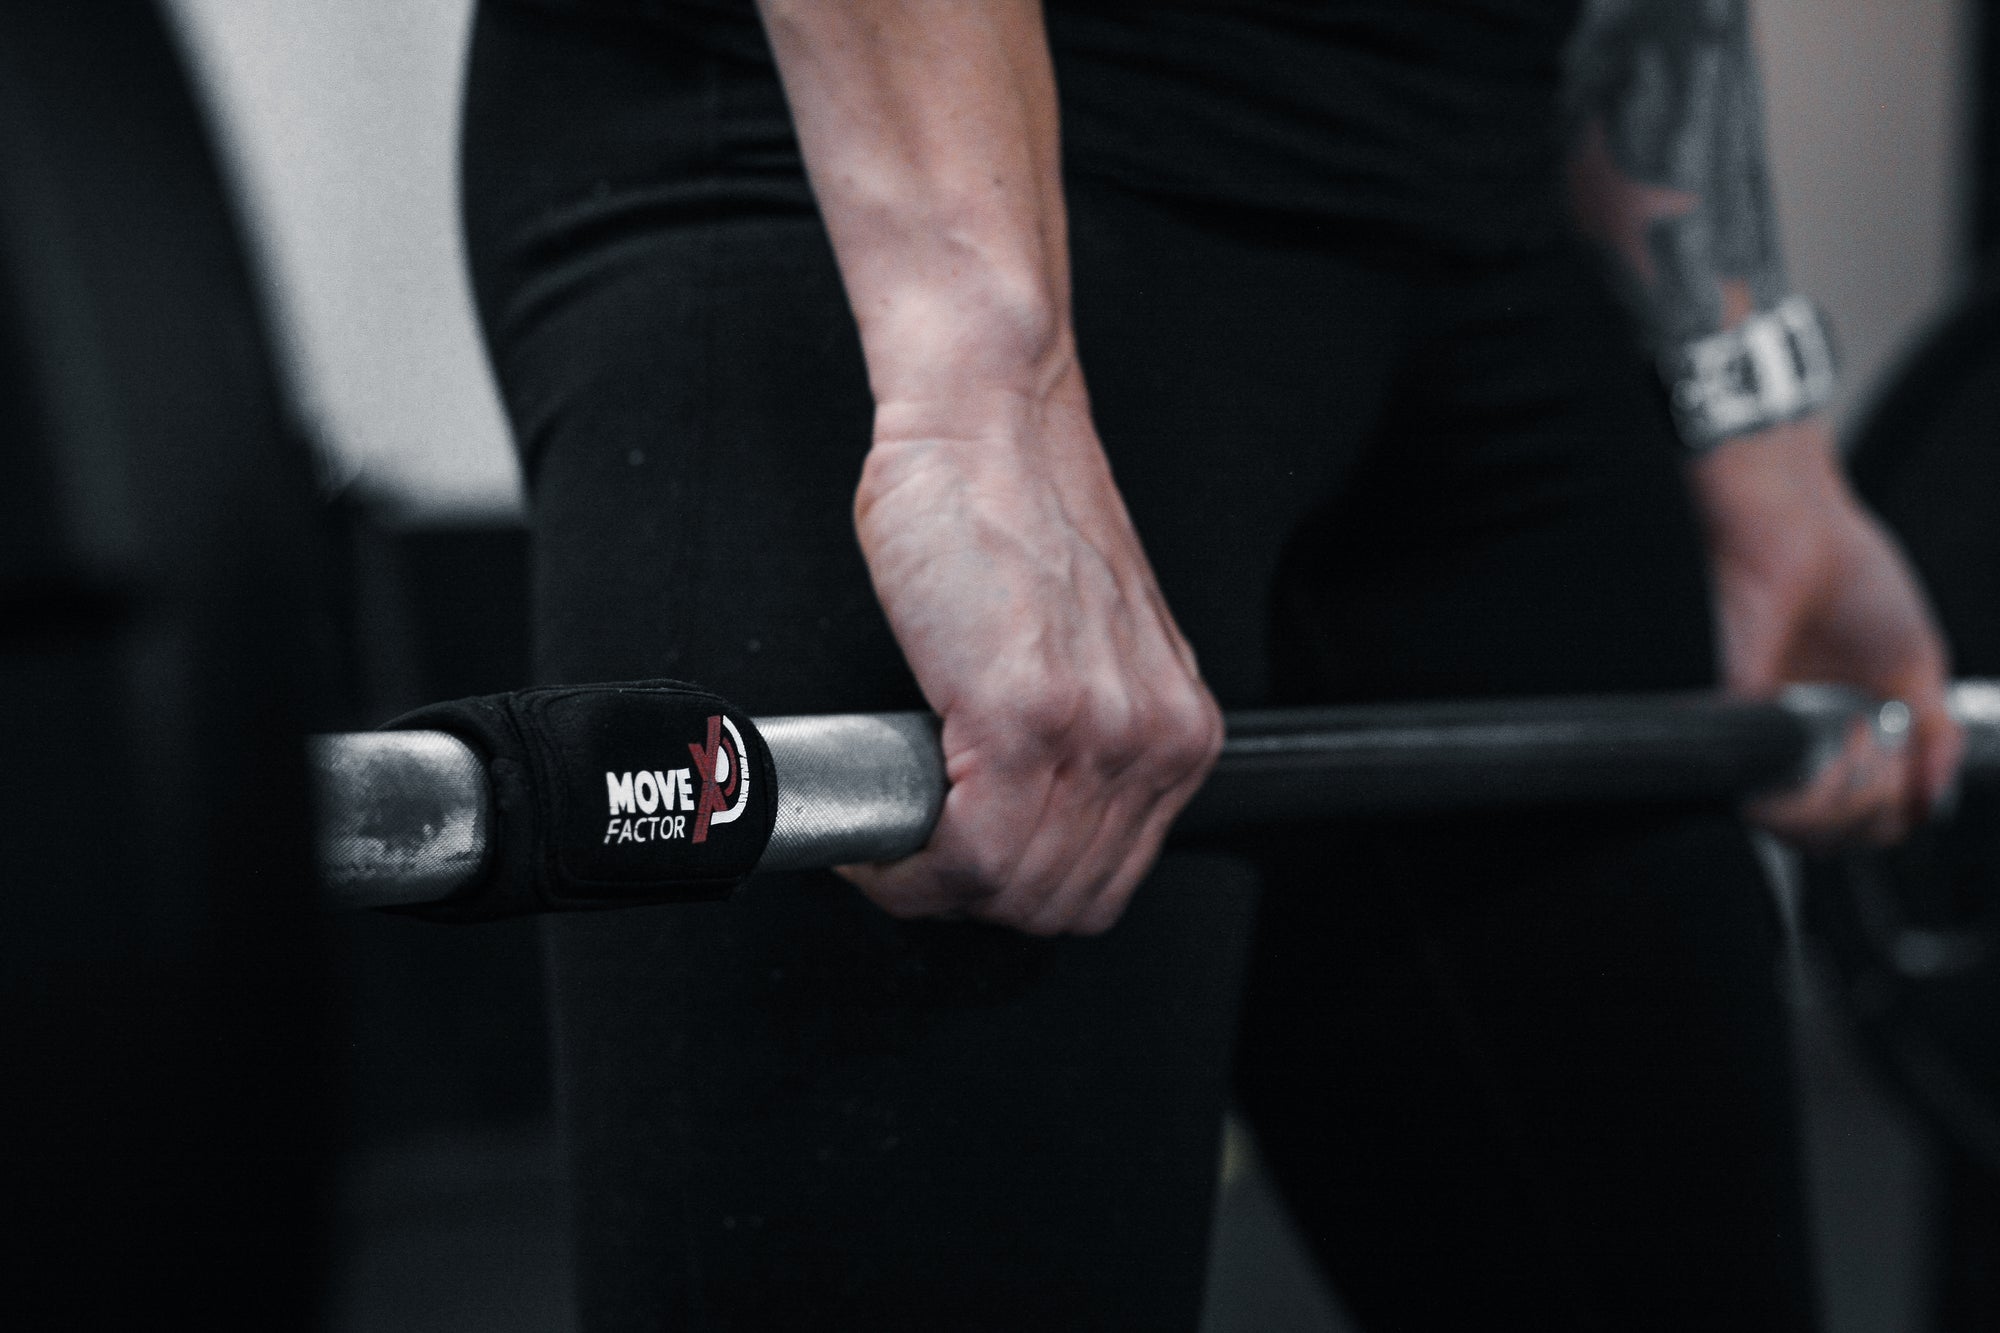 MoveFactorX Module on Barbell